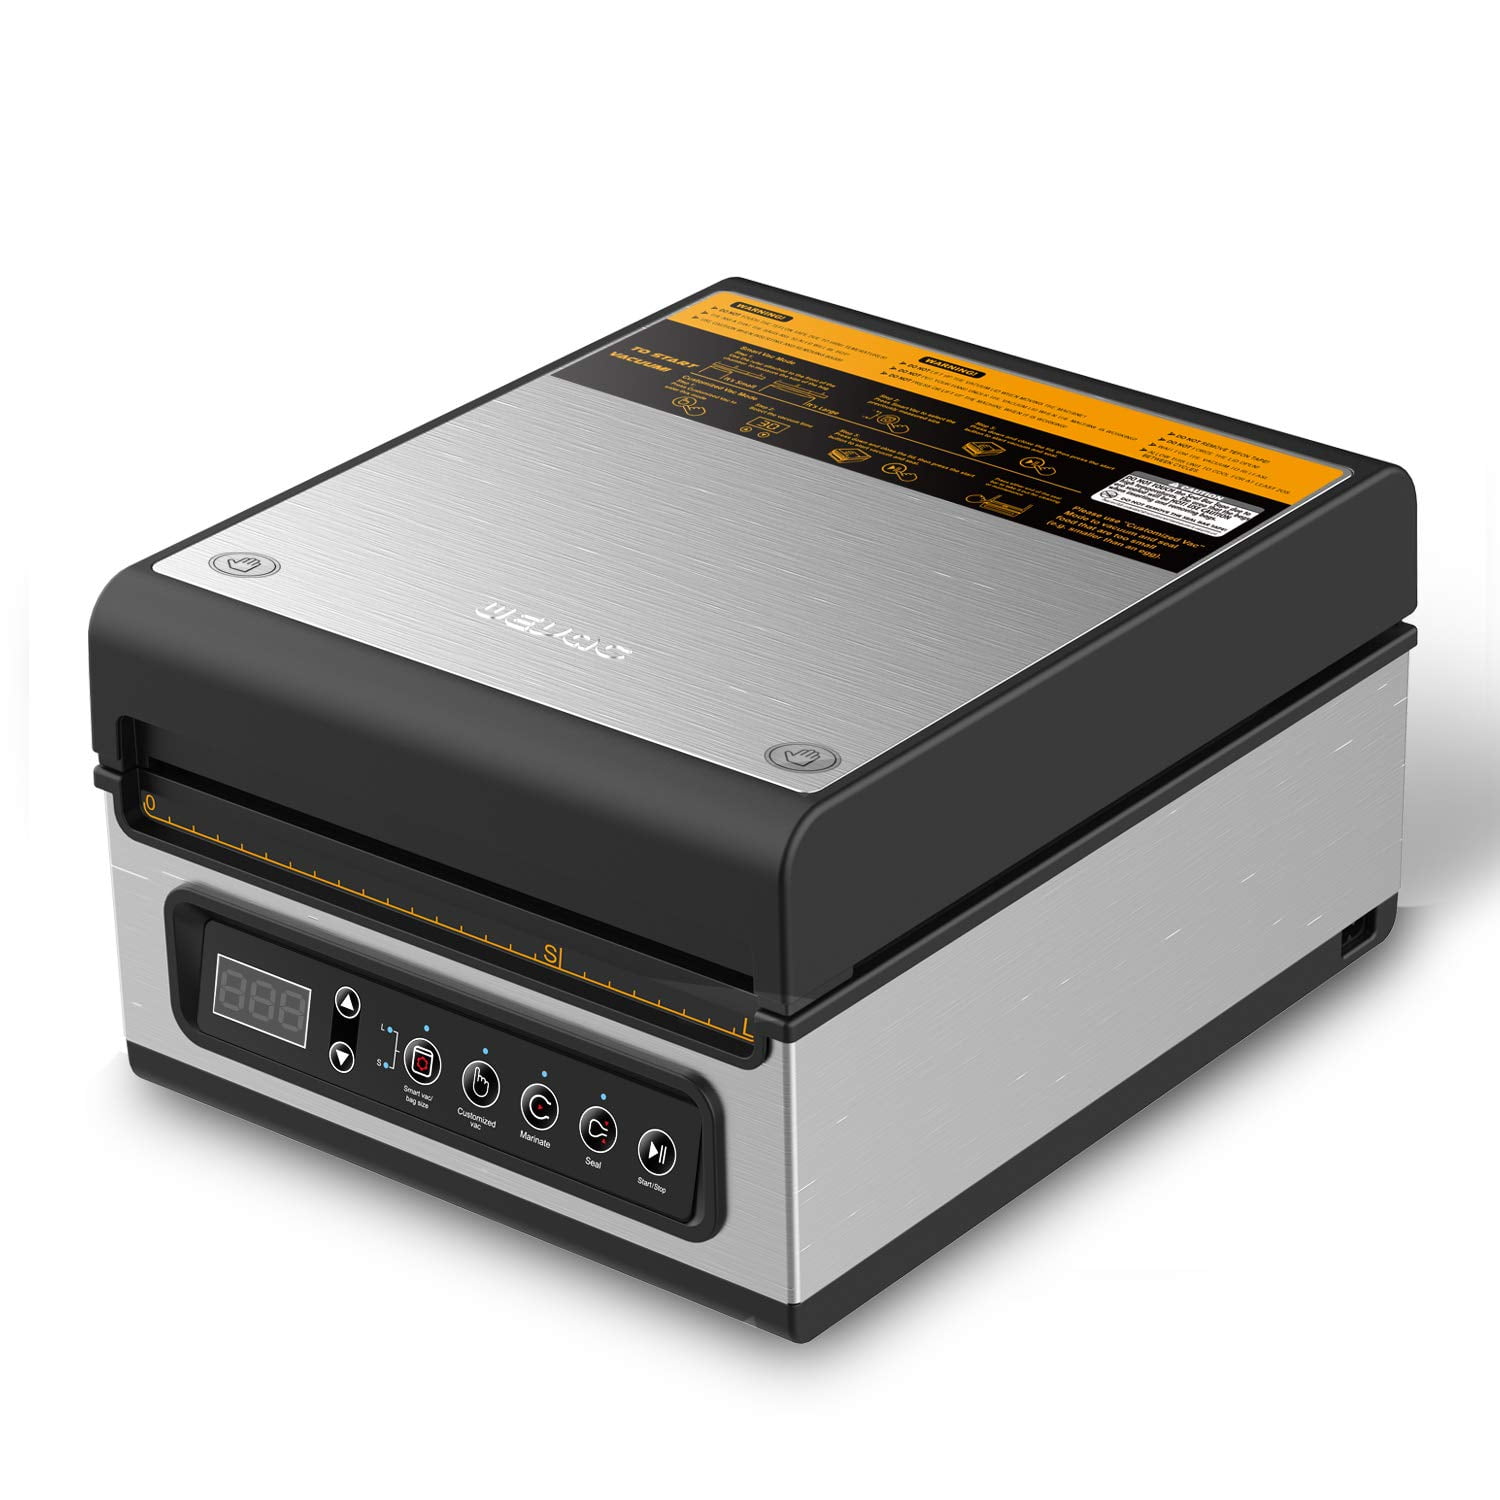 Wevac 12 inch Chamber Vacuum Sealer, CV12, ideal for liquid or juicy food  including Fresh Meats, Soups, Sauces and Marinades. Compact design, Heavy